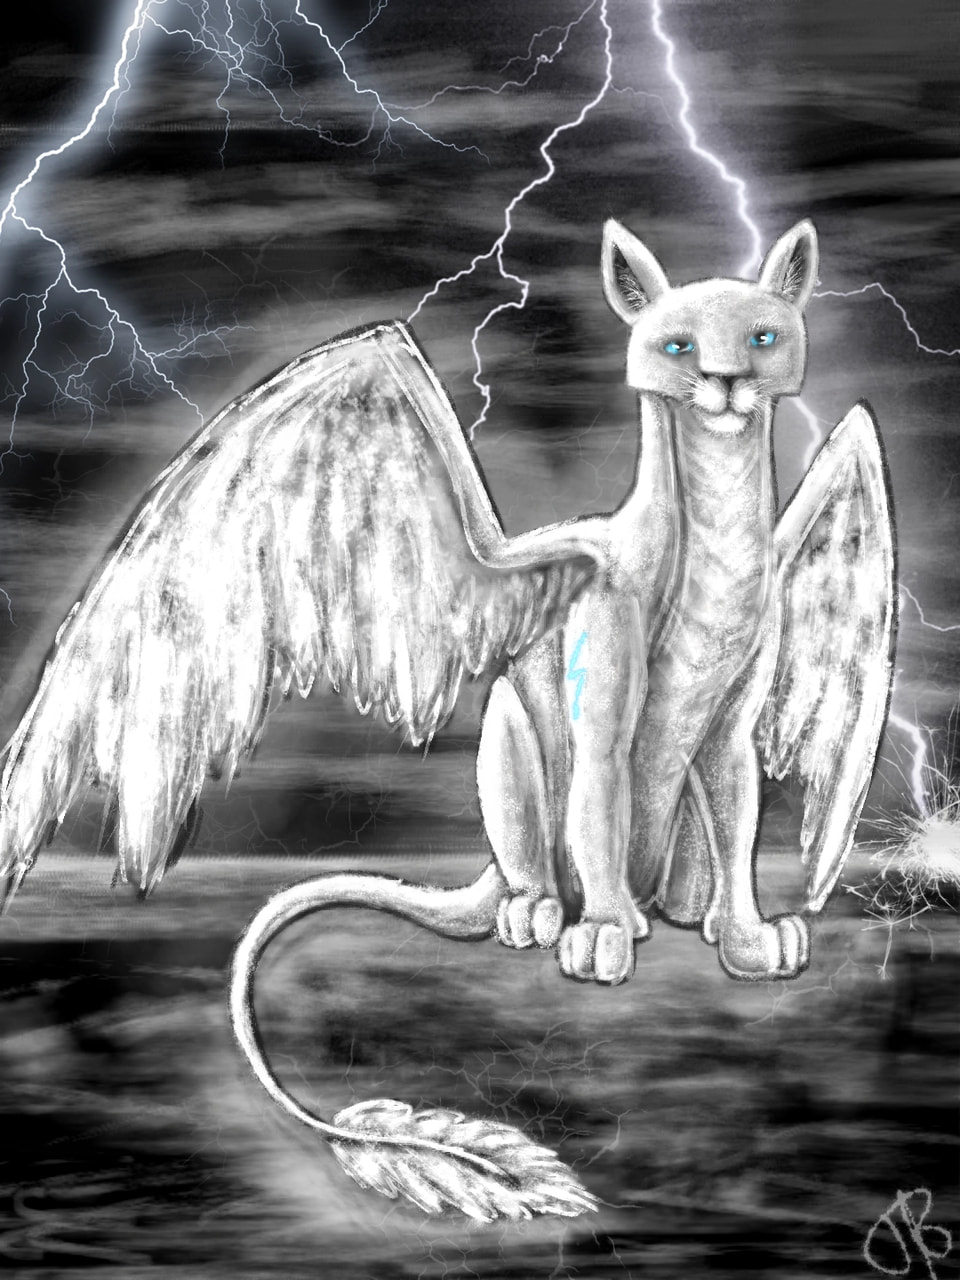 Does anyone have name ideas for him and his species? His name should end with -iel and the name of the species should sound strong/epic. #fantasy #creature #flash #lightning #thunder #light #dark #angel #animal  #idk #specieschallenge #fridayswithsketch